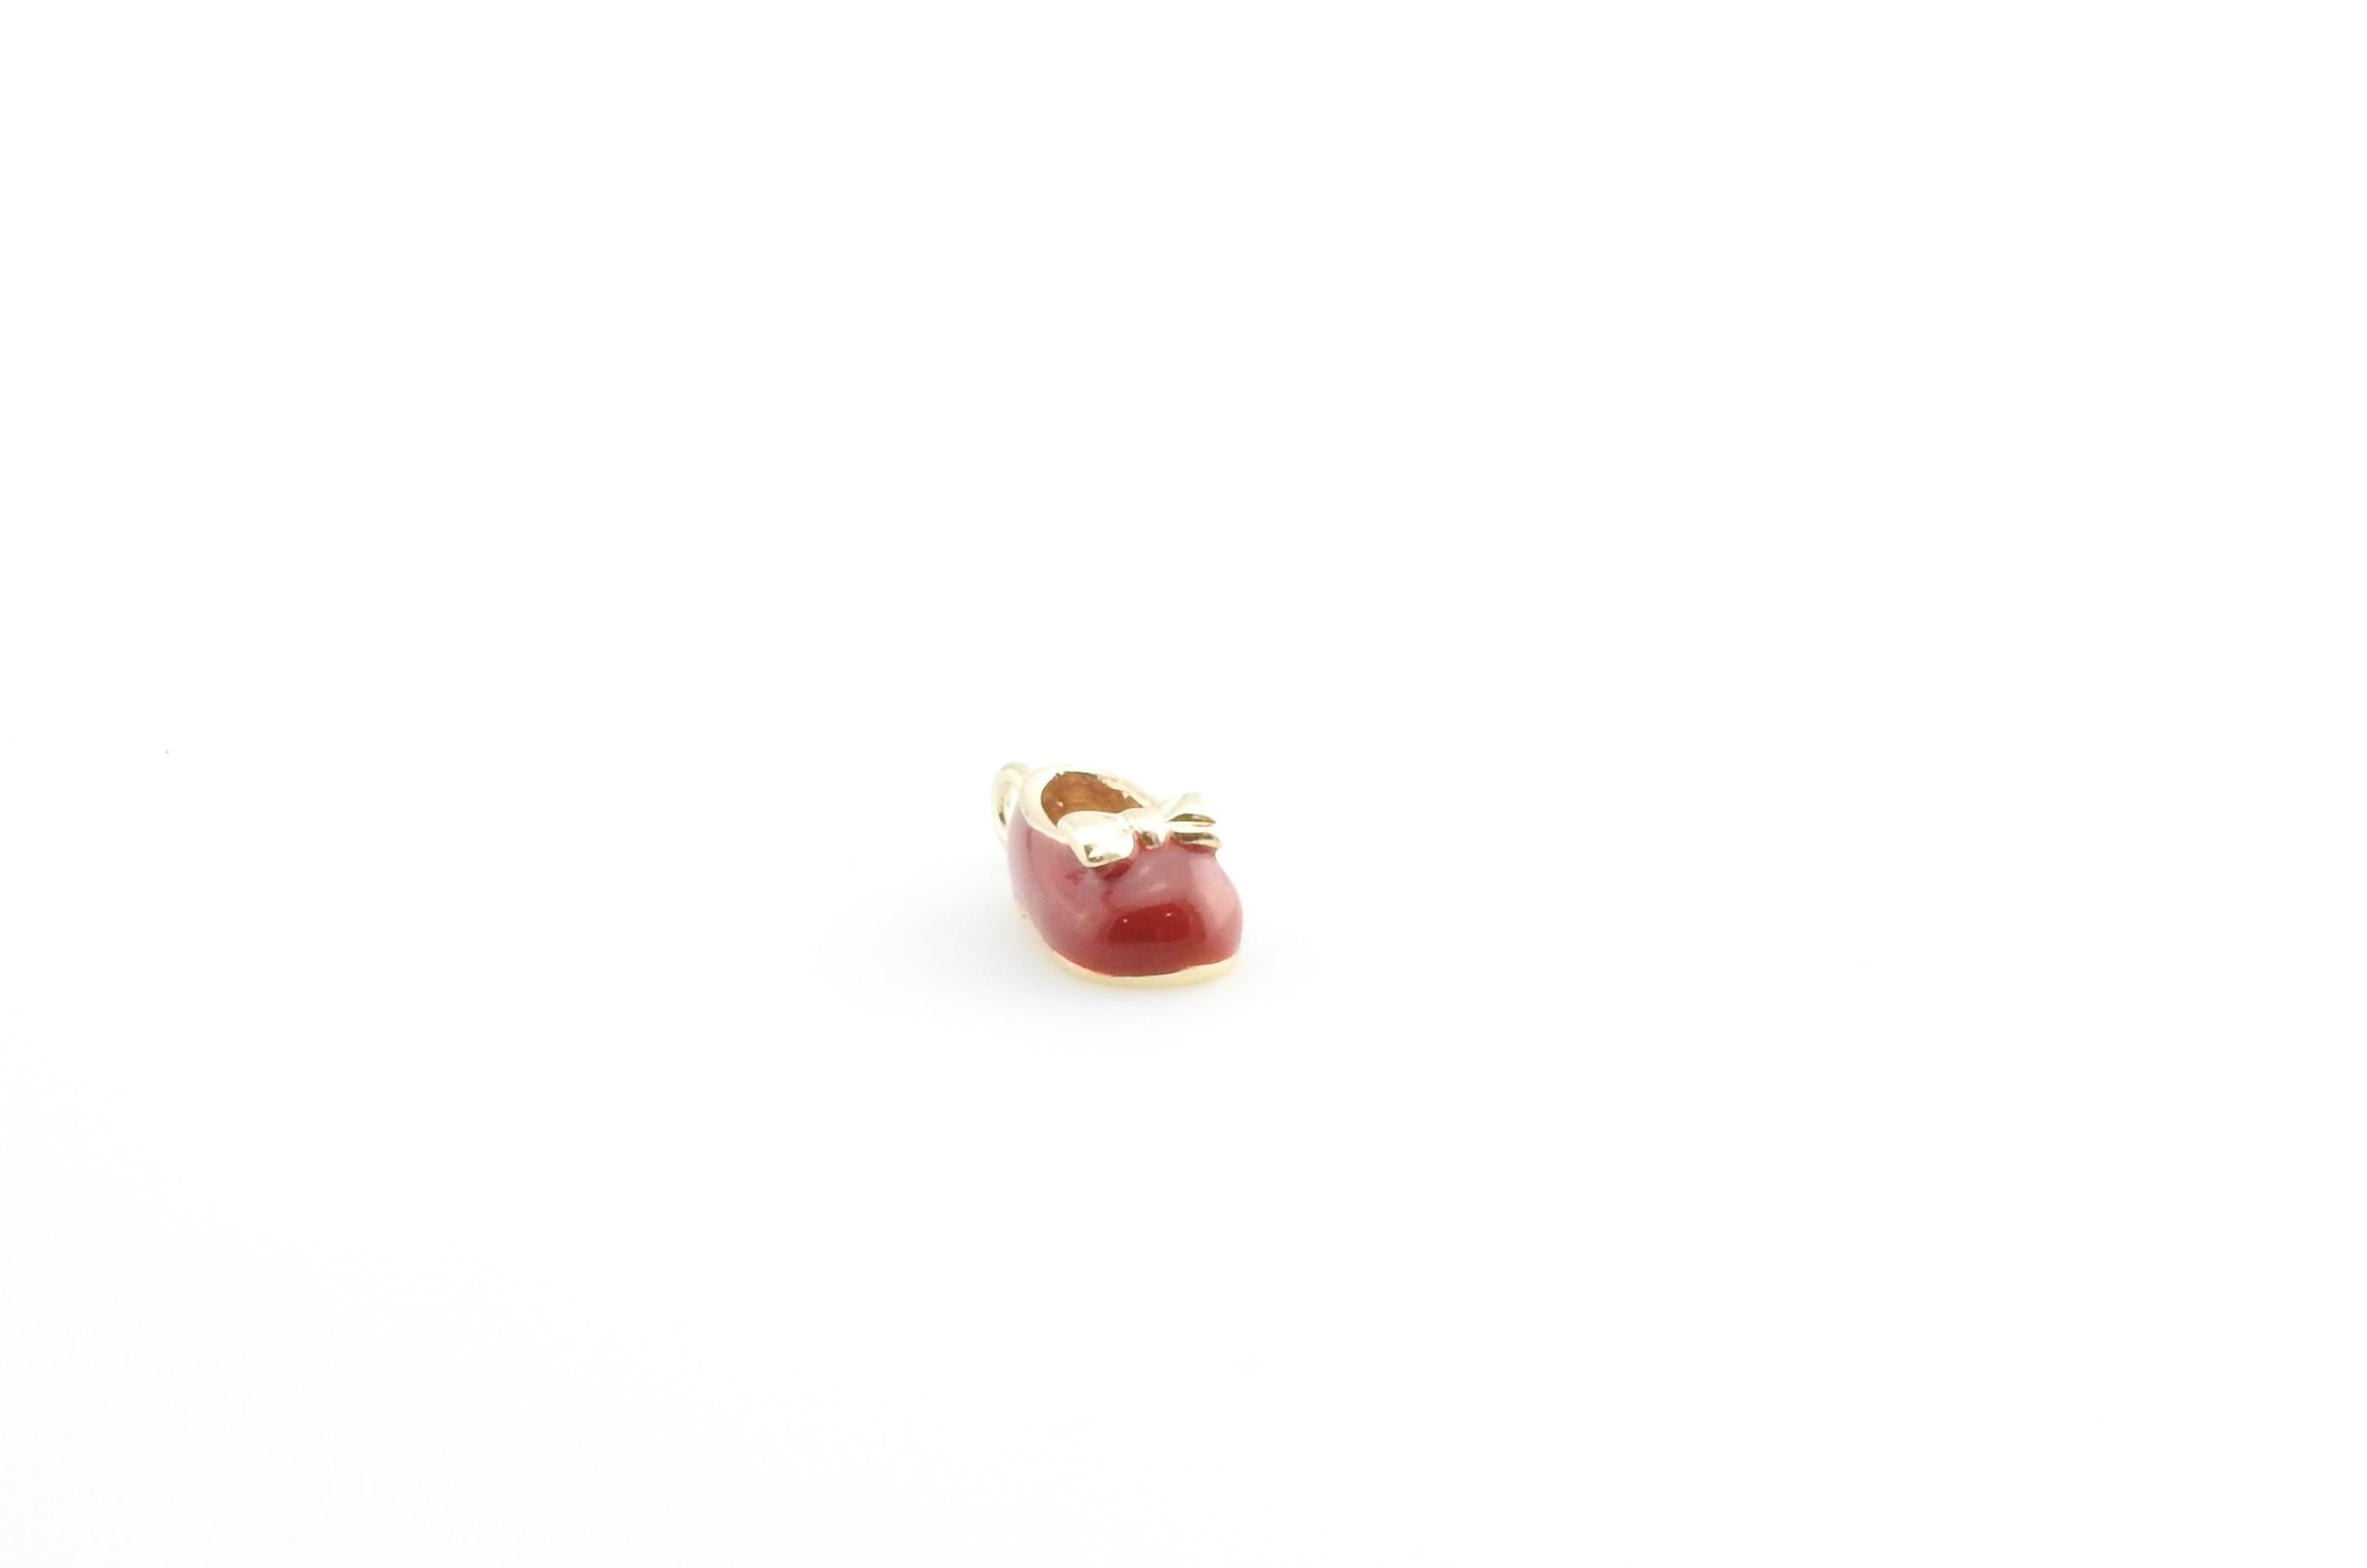 Vintage 10 Karat Yellow Gold and Red Enamel Baby Shoe Charm

Celebrate baby's first steps!

This lovely 3D charm features a miniature baby shoe accented with red enamel and crafted in beautifully detailed 10K yellow gold.

Size: 13 mm x 7 mm actual